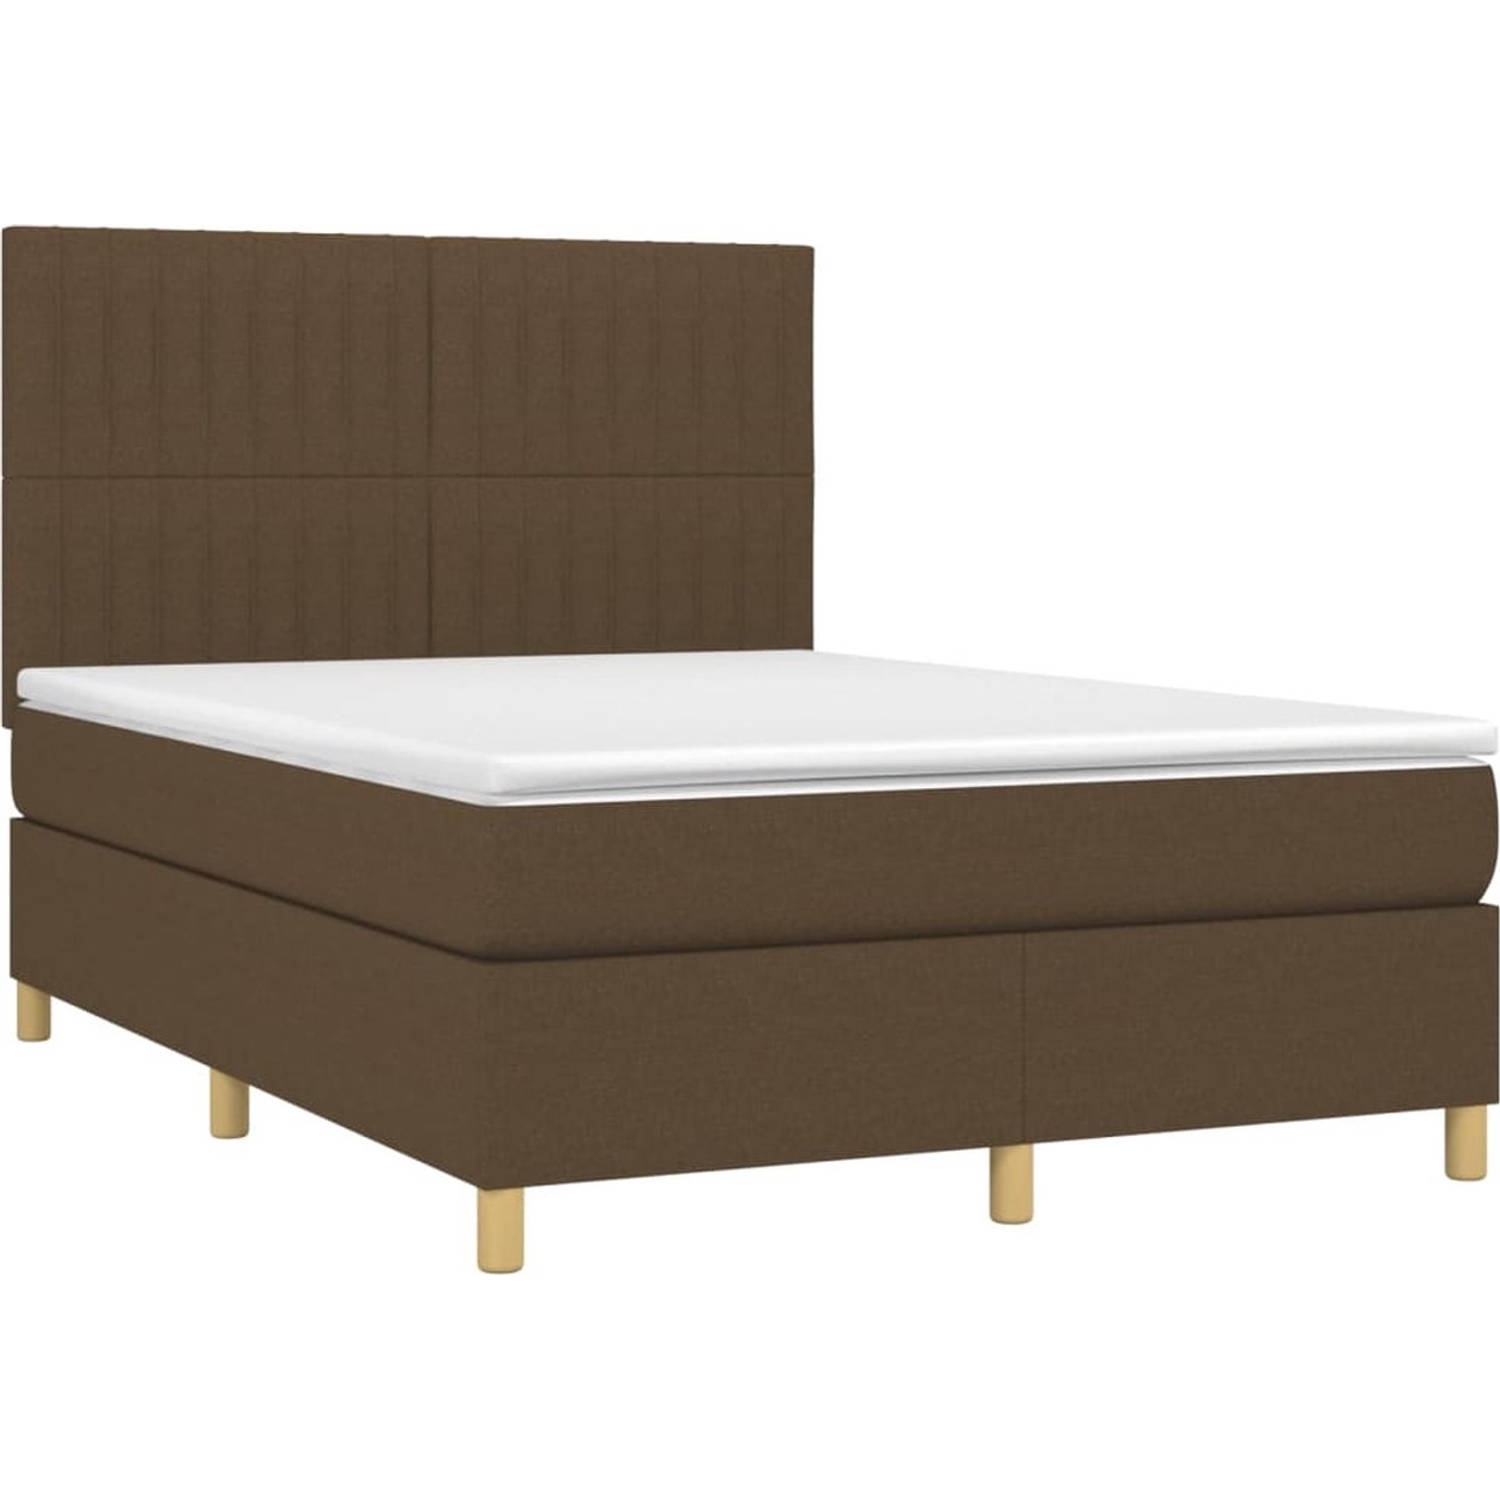 The Living Store Bed Boxspring - donkerbruin - 203x144x118/128 cm - LED-verlichting en pocketvering matras